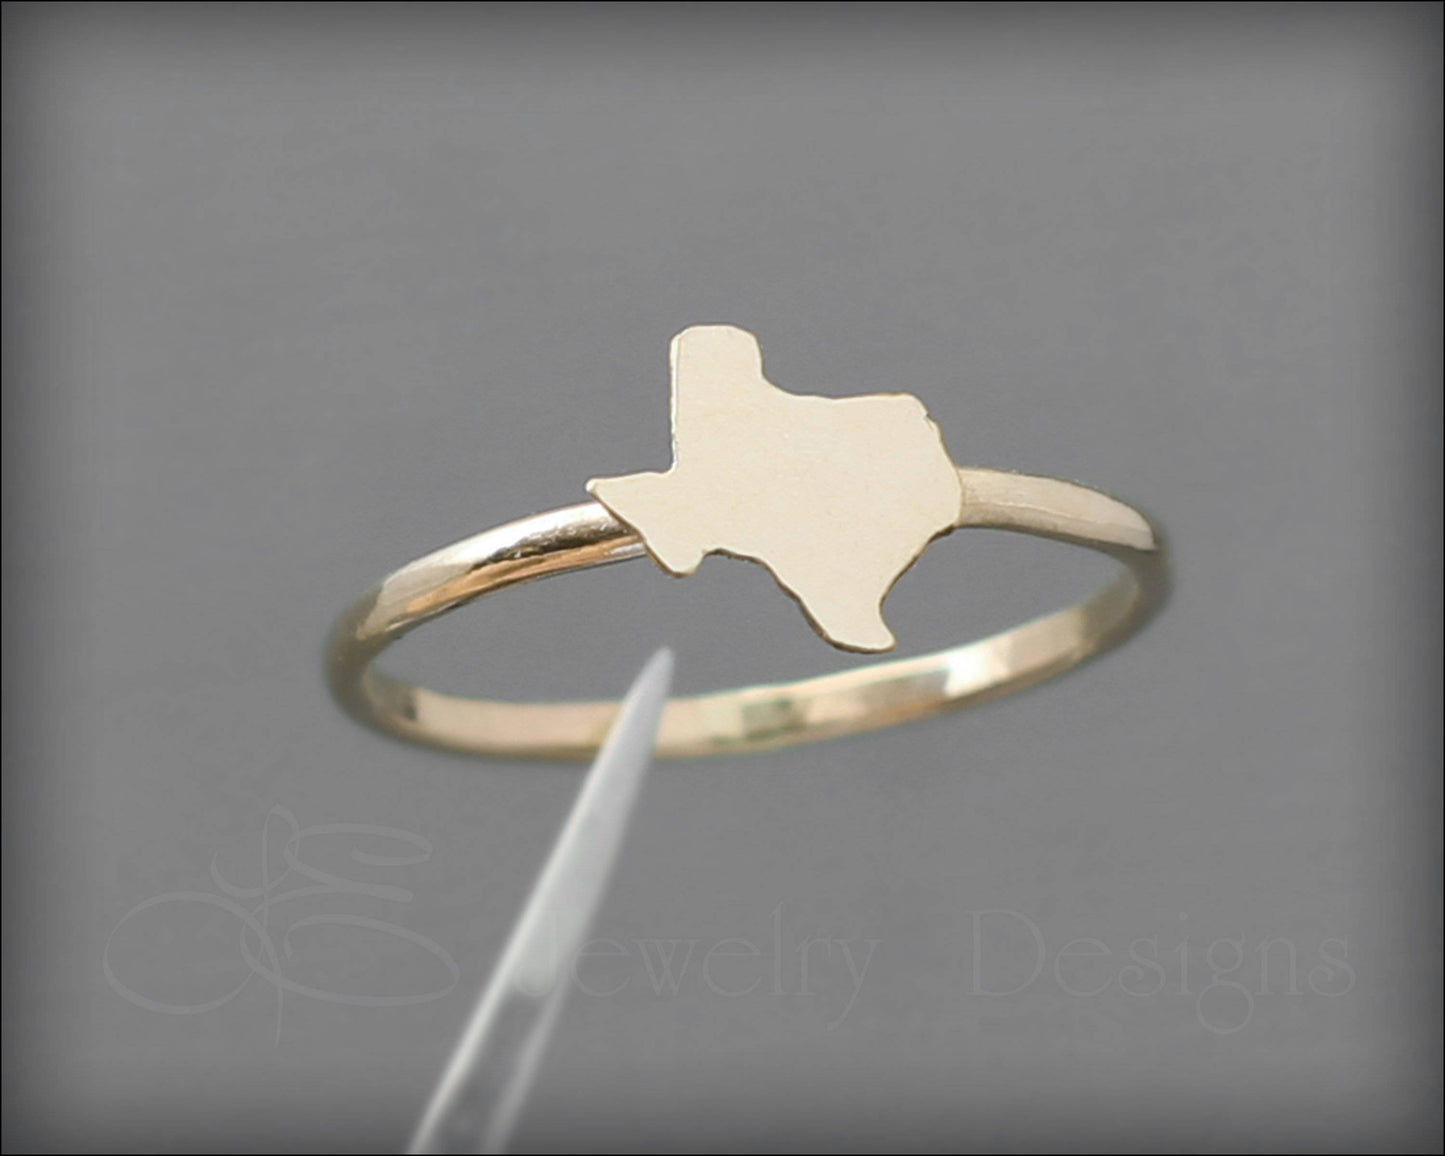 Texas Ring - (sterling or 14k gold) - LE Jewelry Designs